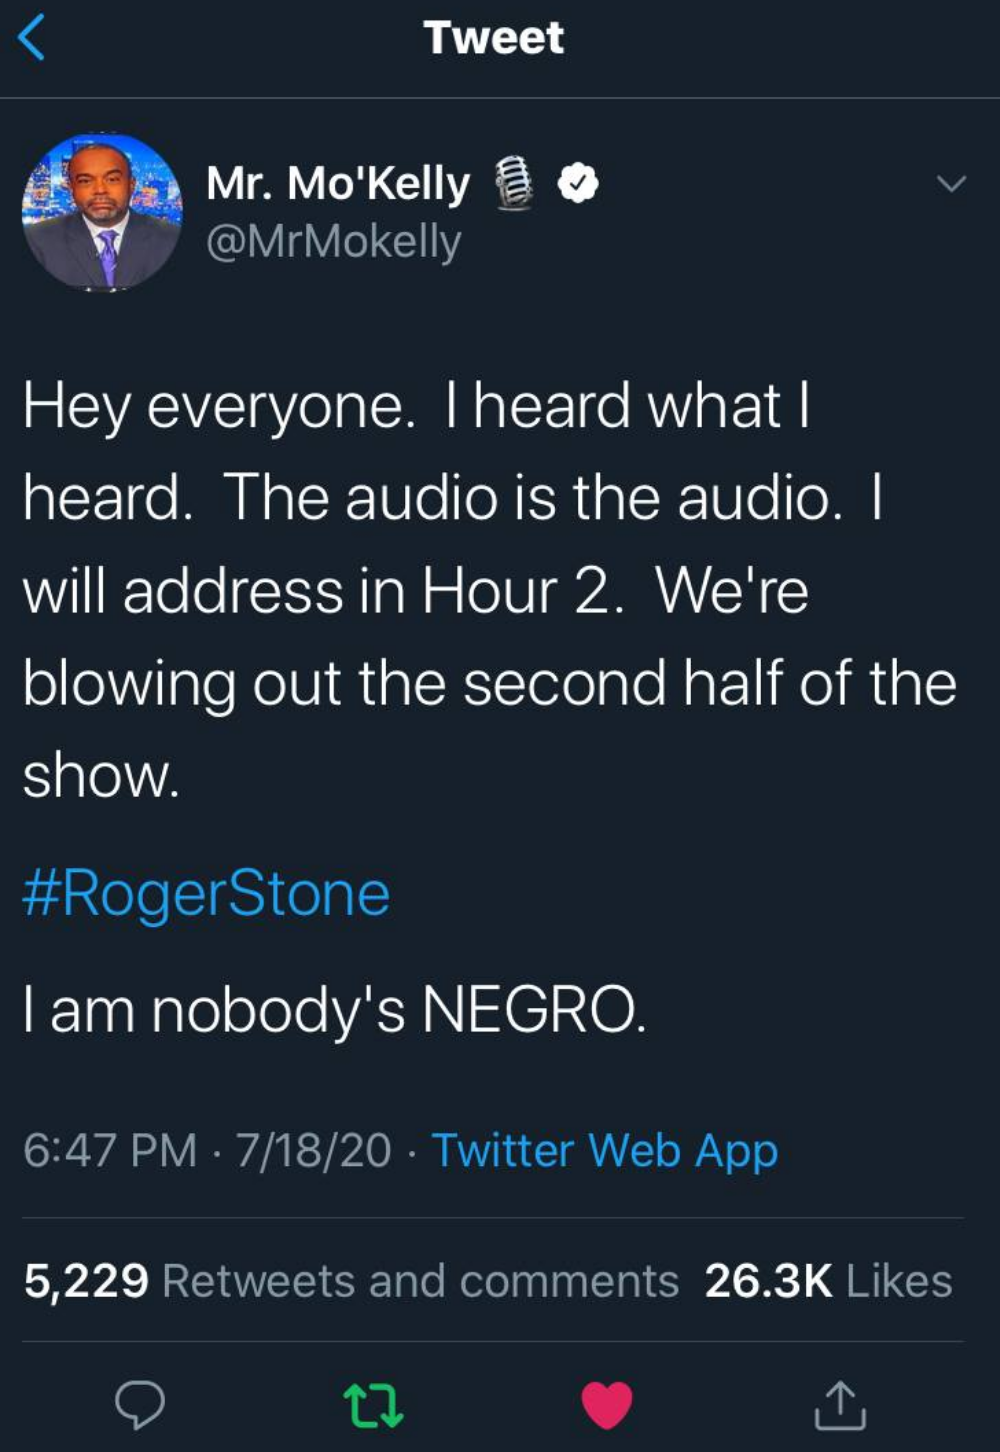 Roger Stone Uses Racial Slur In Live Radio Interview With Black Host